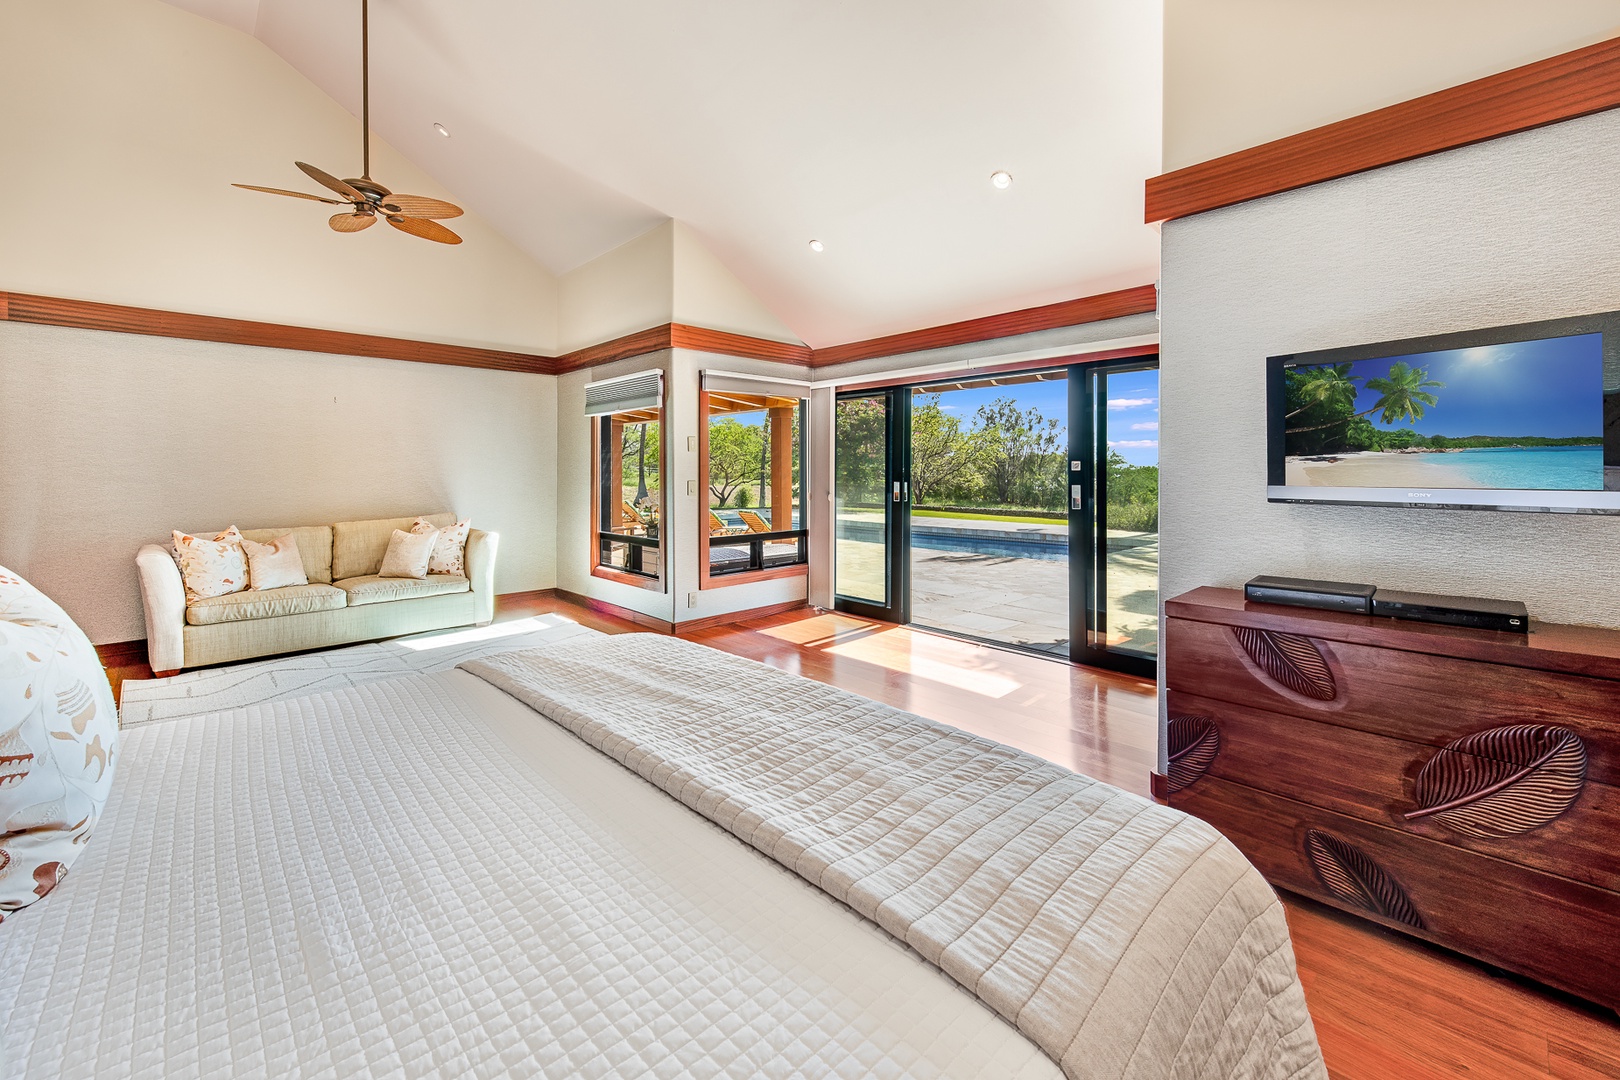 Kamuela Vacation Rentals, Olomana Hale at Kohala Ranch - The primary bedroom has a king bed and ensuite bath